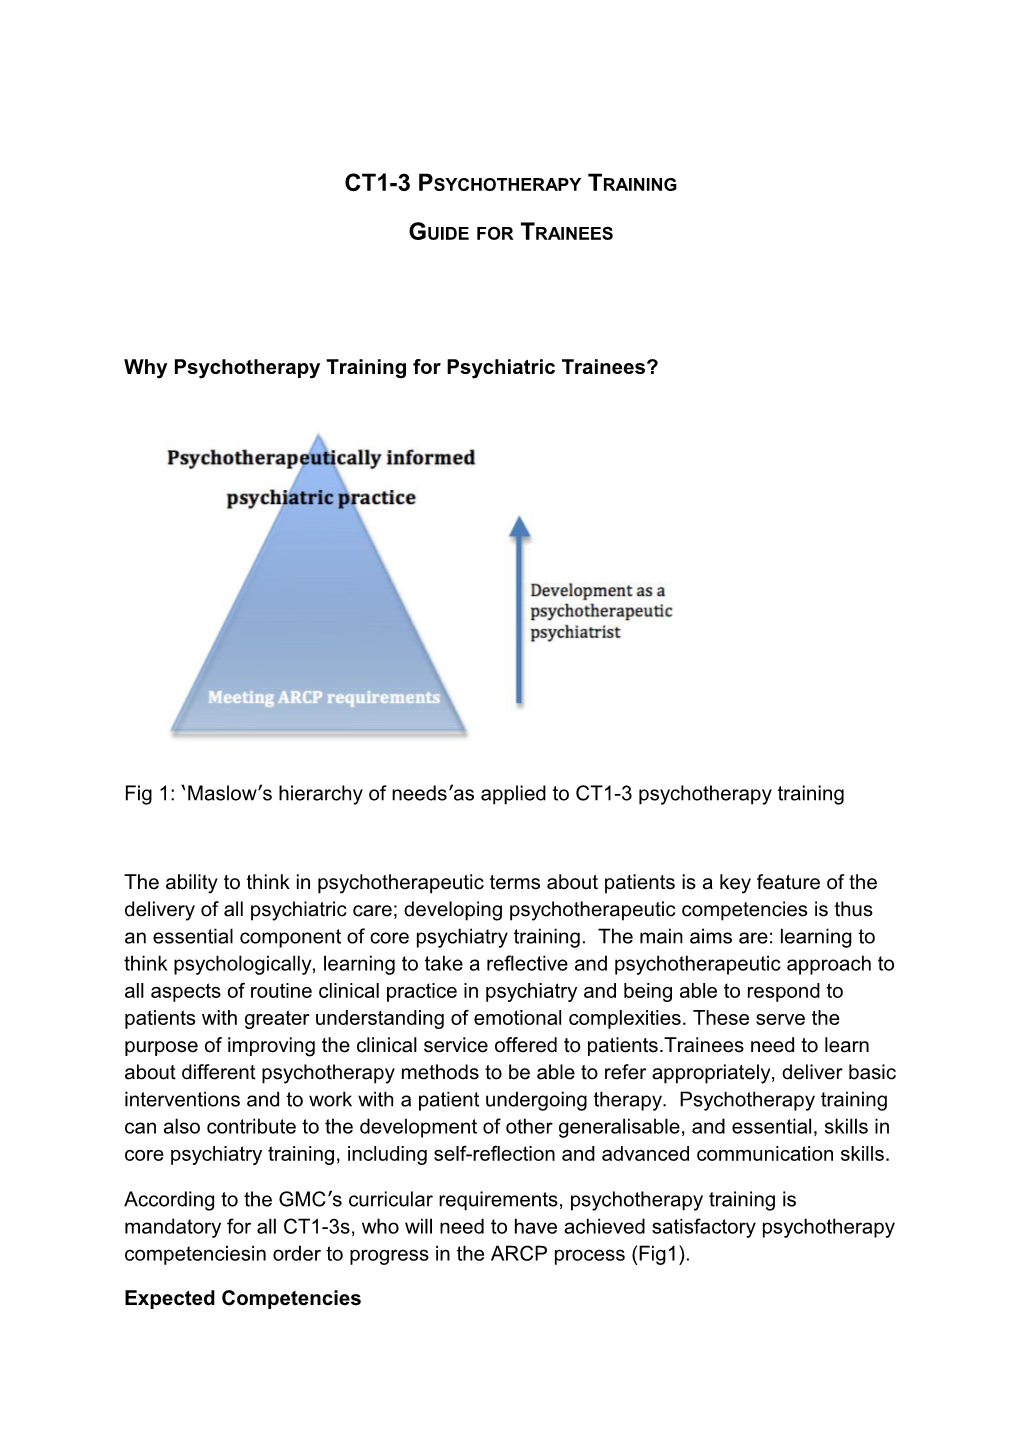 Why Psychotherapy Training for Psychiatric Trainees?